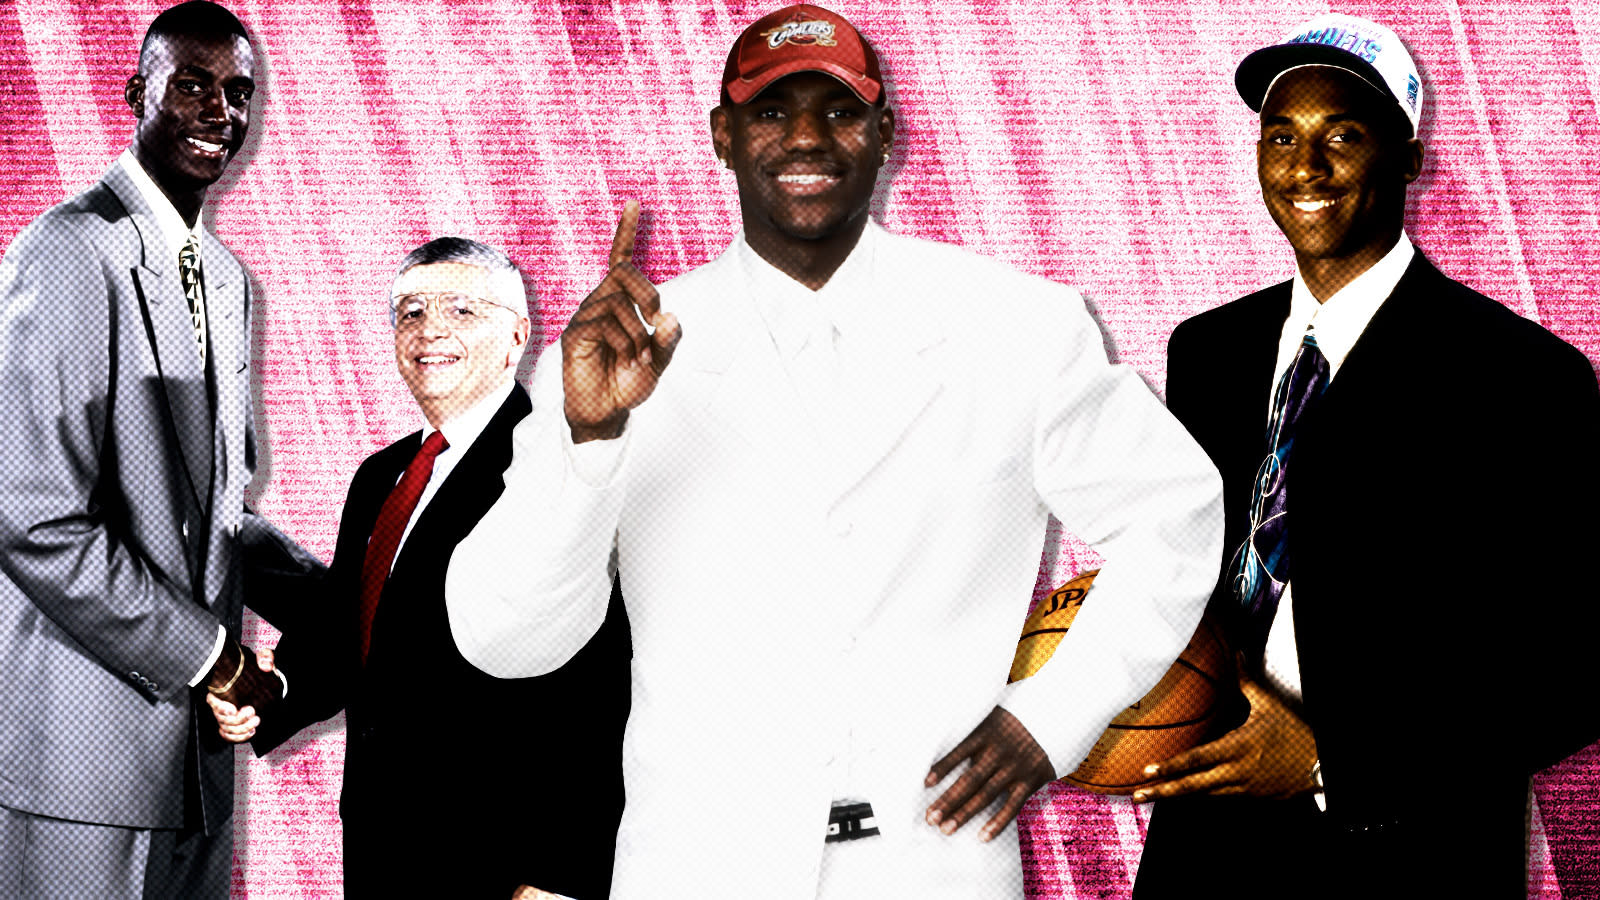 The 'NBA players drafted out of high school' quiz